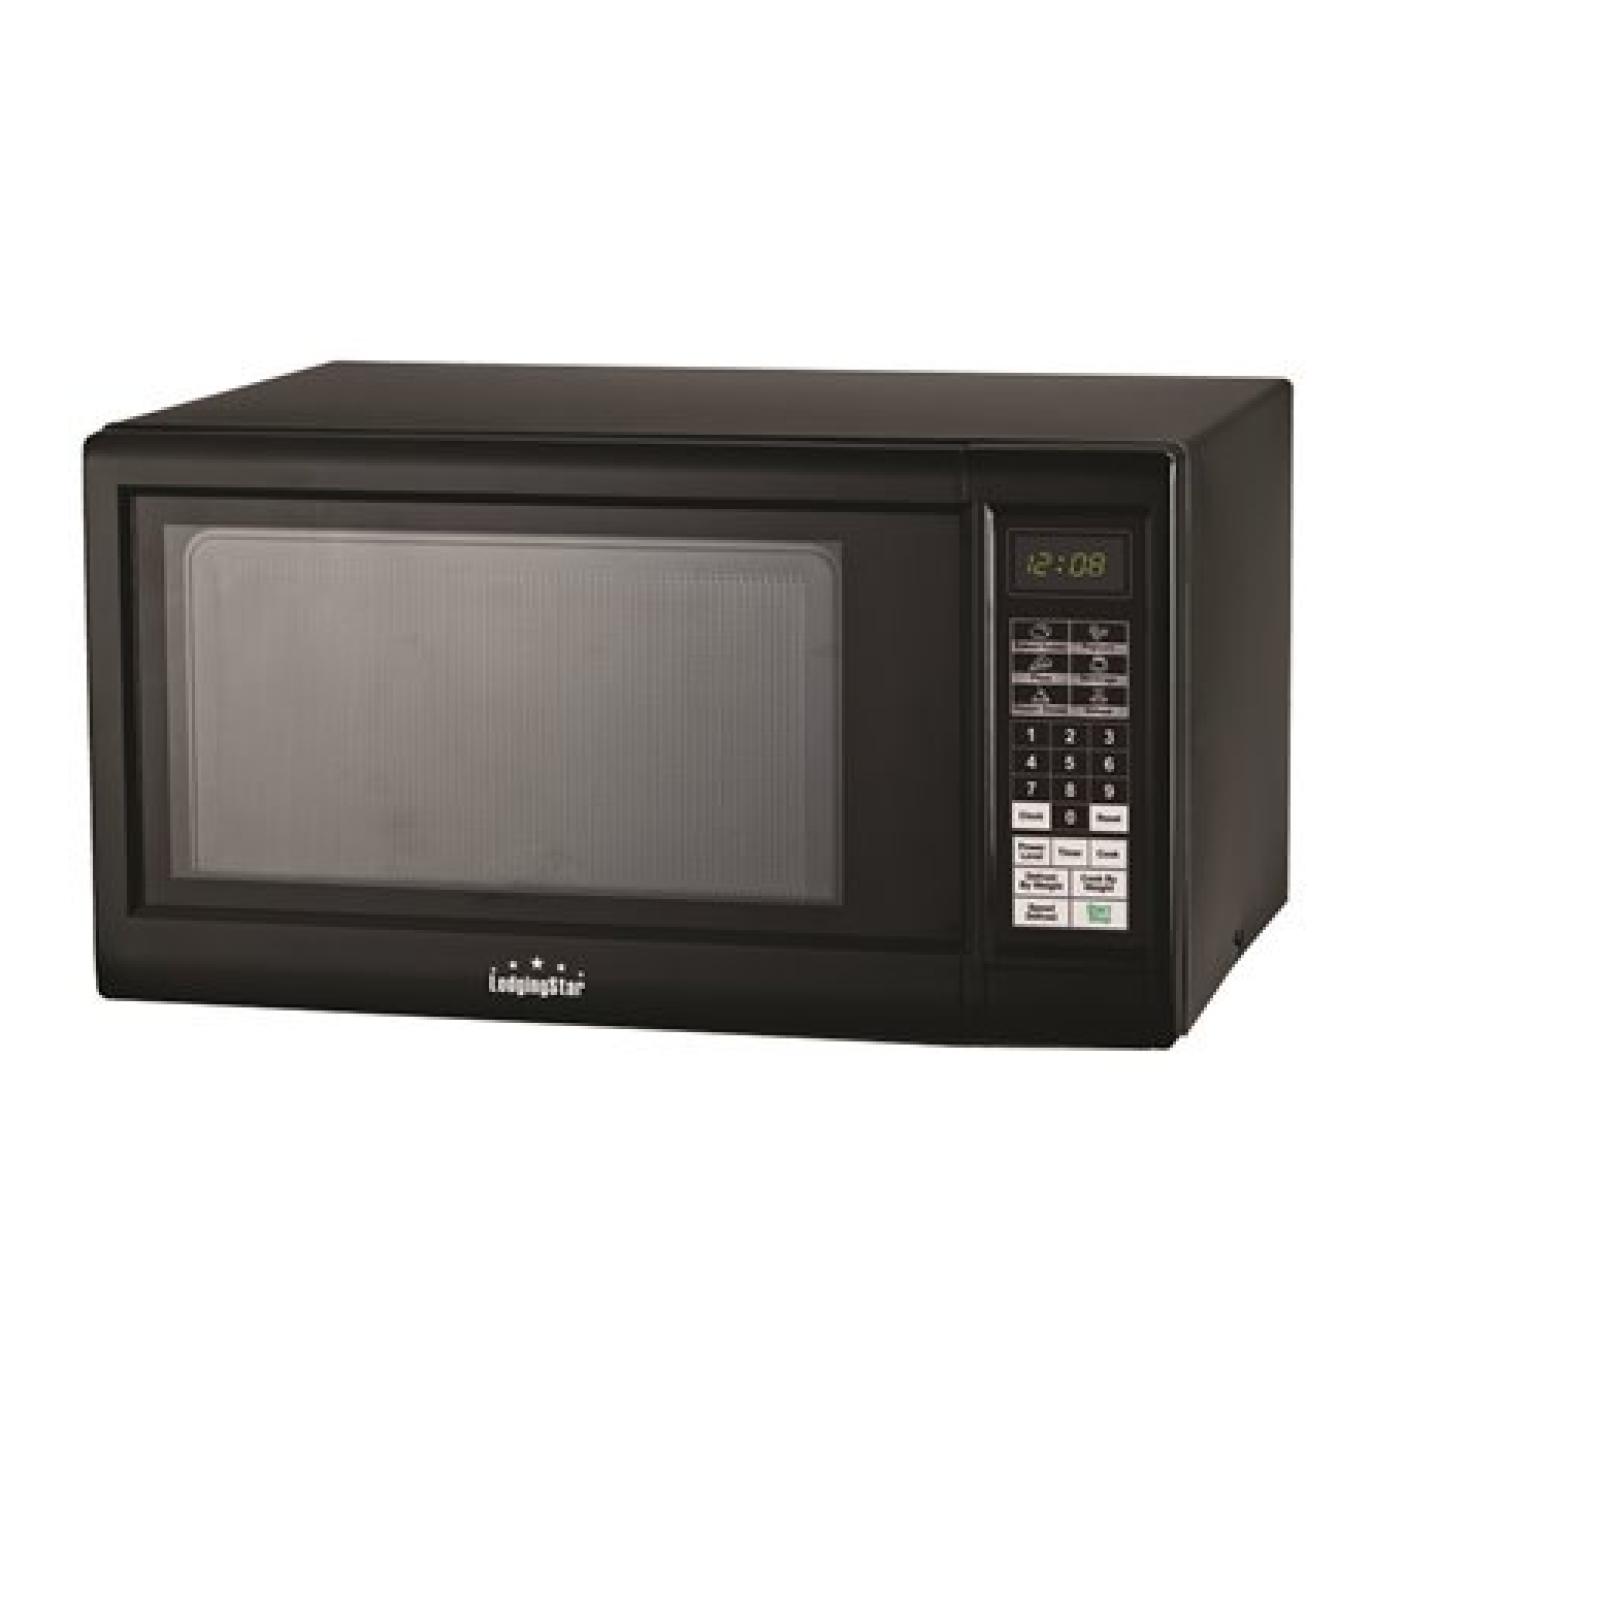 DALLAS LOCATION - LODGING STAR 1.1 cu. ft. Countertop Microwave in Black with Electronic Touch Controls PALLET - (25 UNITS)